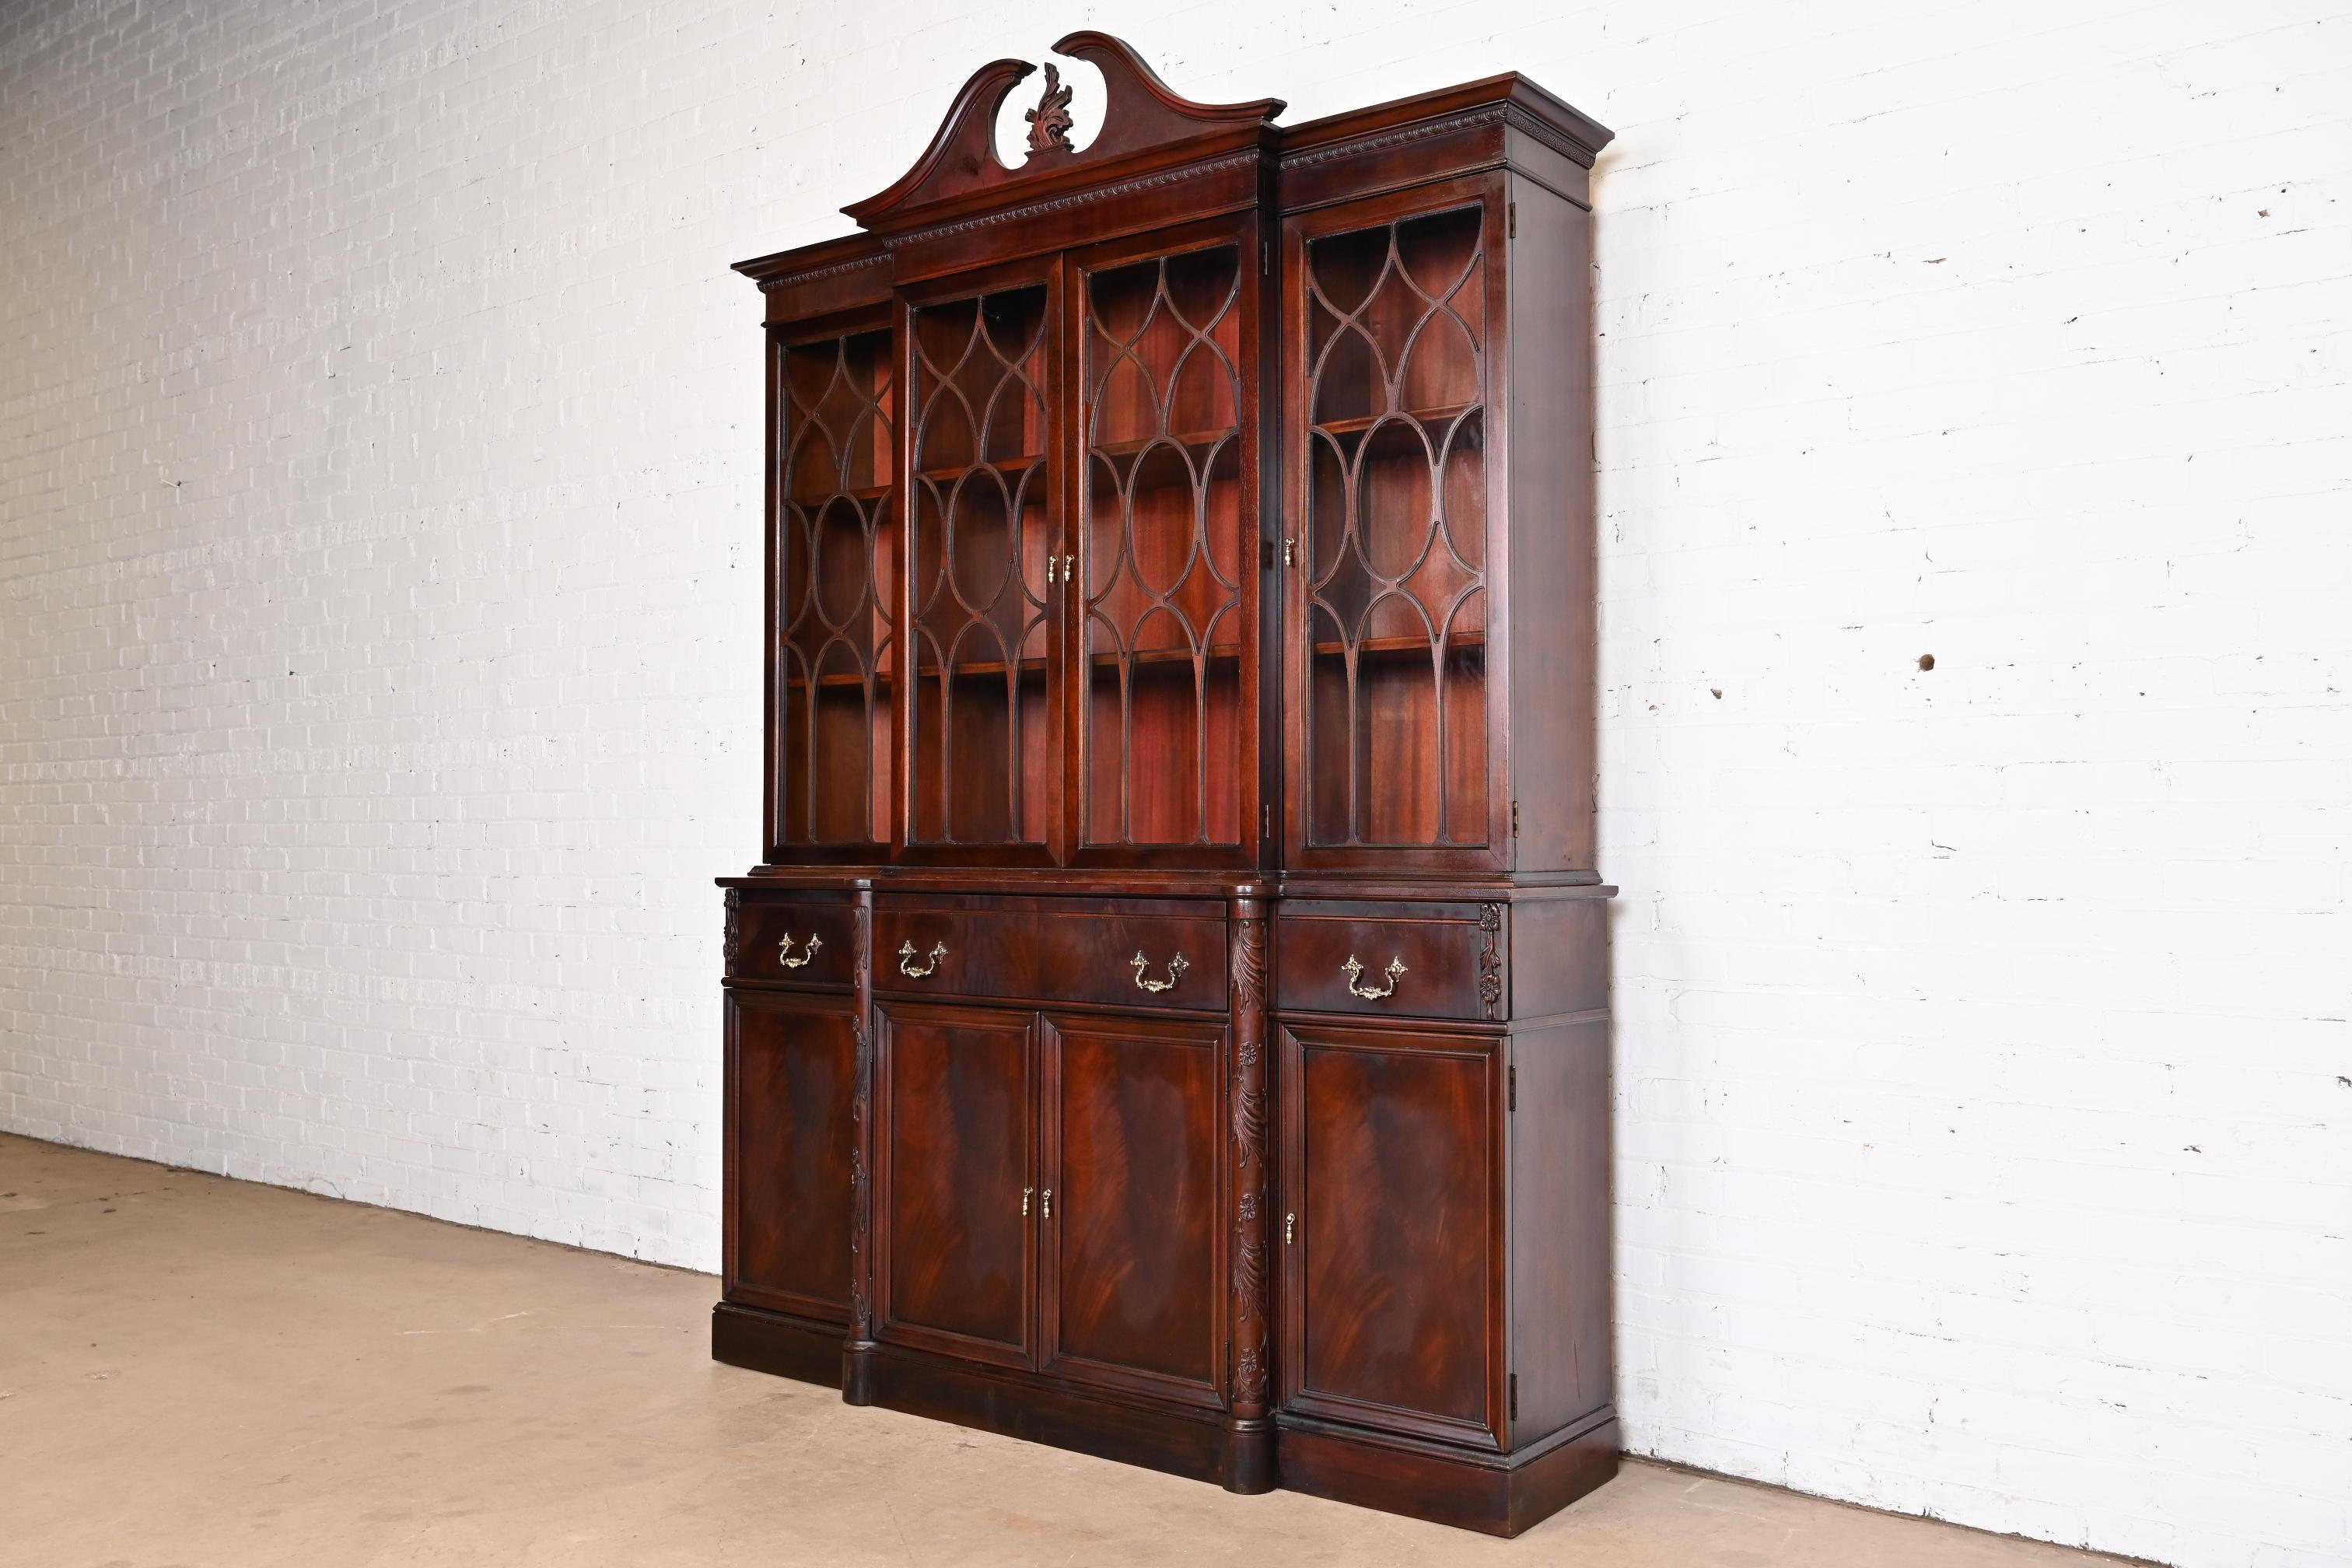 A gorgeous Georgian or Chippendale style breakfront bookcase or dining cabinet with drop front secretary desk

In the manner of Baker Furniture

By Vanleigh

USA, Circa 1930s

Carved flame mahogany, with mullioned glass front doors and original